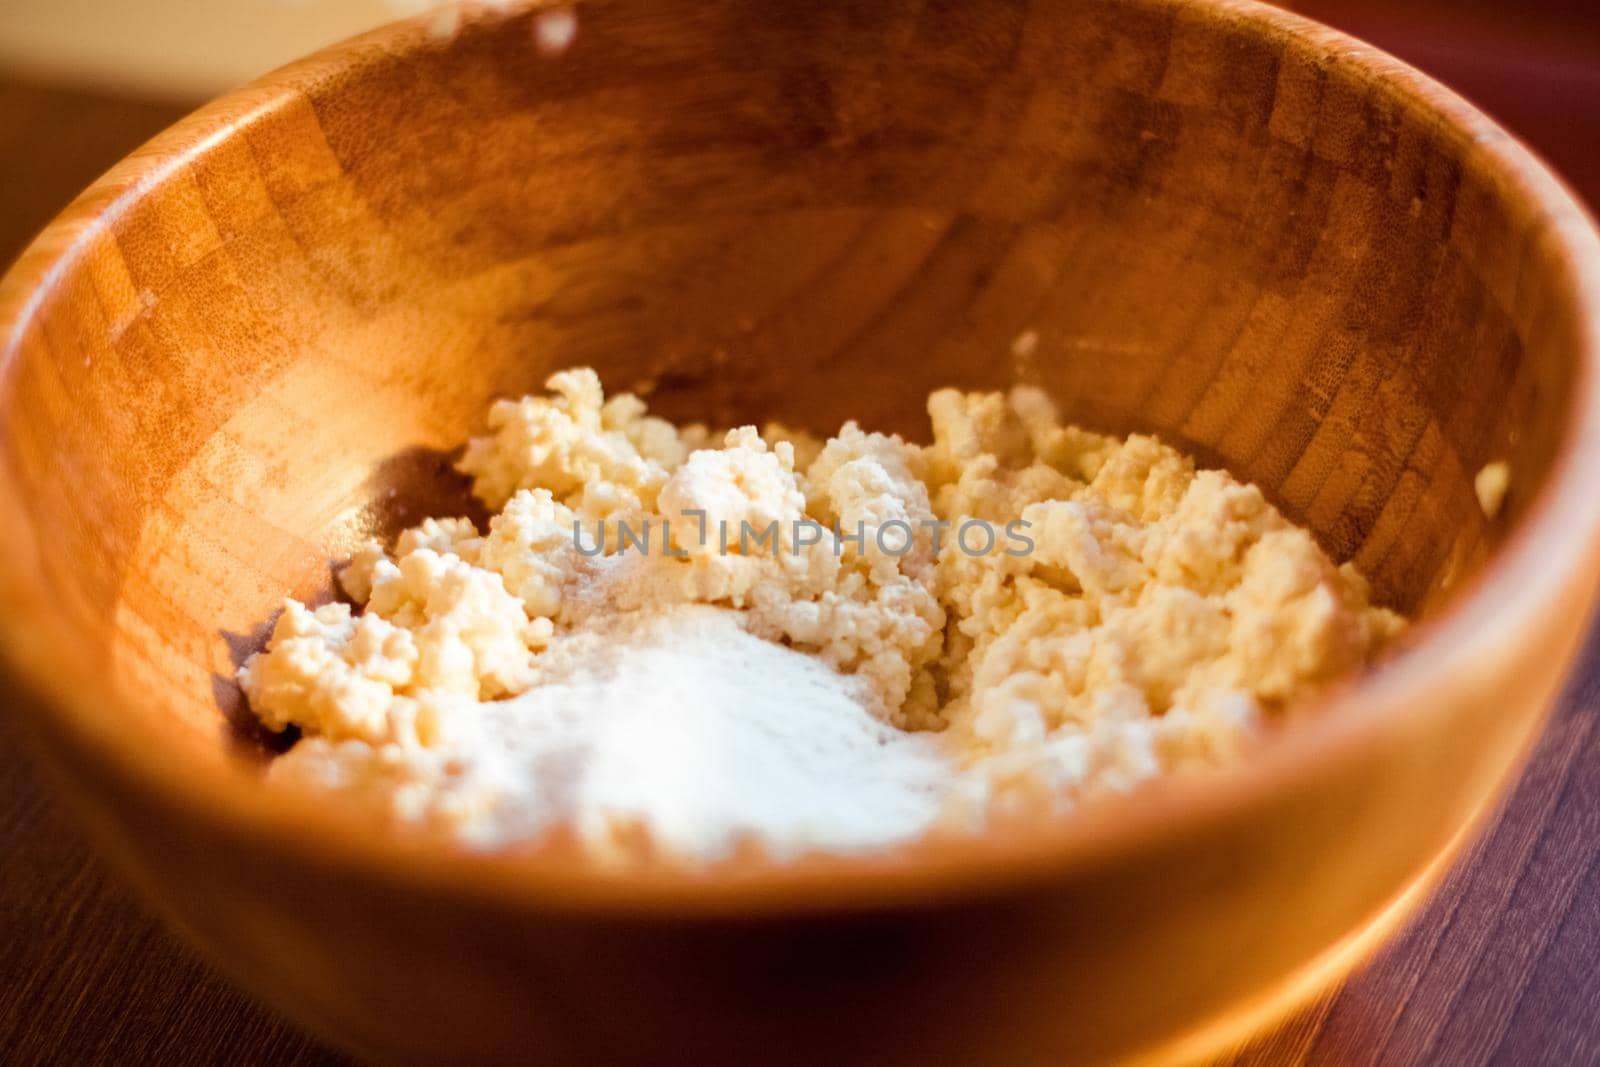 Flour, eggs and cottage cheese, rustic cookbook recipe - weekend cooking, food blog and homemade cuisine concept. Making your favorite pastry